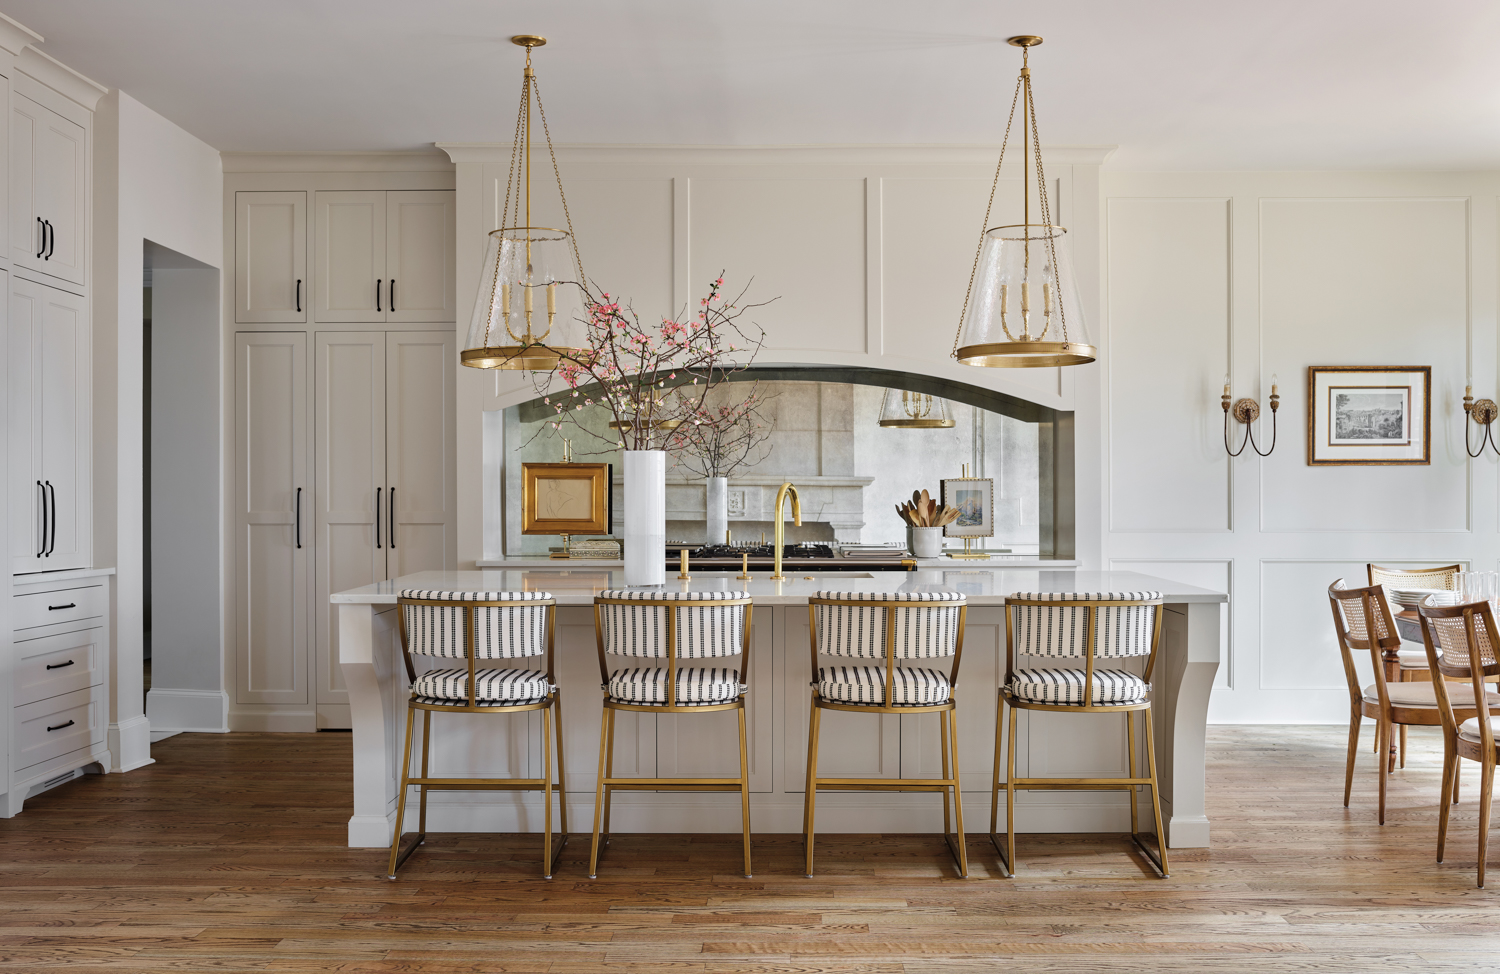 French Flair And Forest Shades Pop In These 2 Refreshed Kitchens